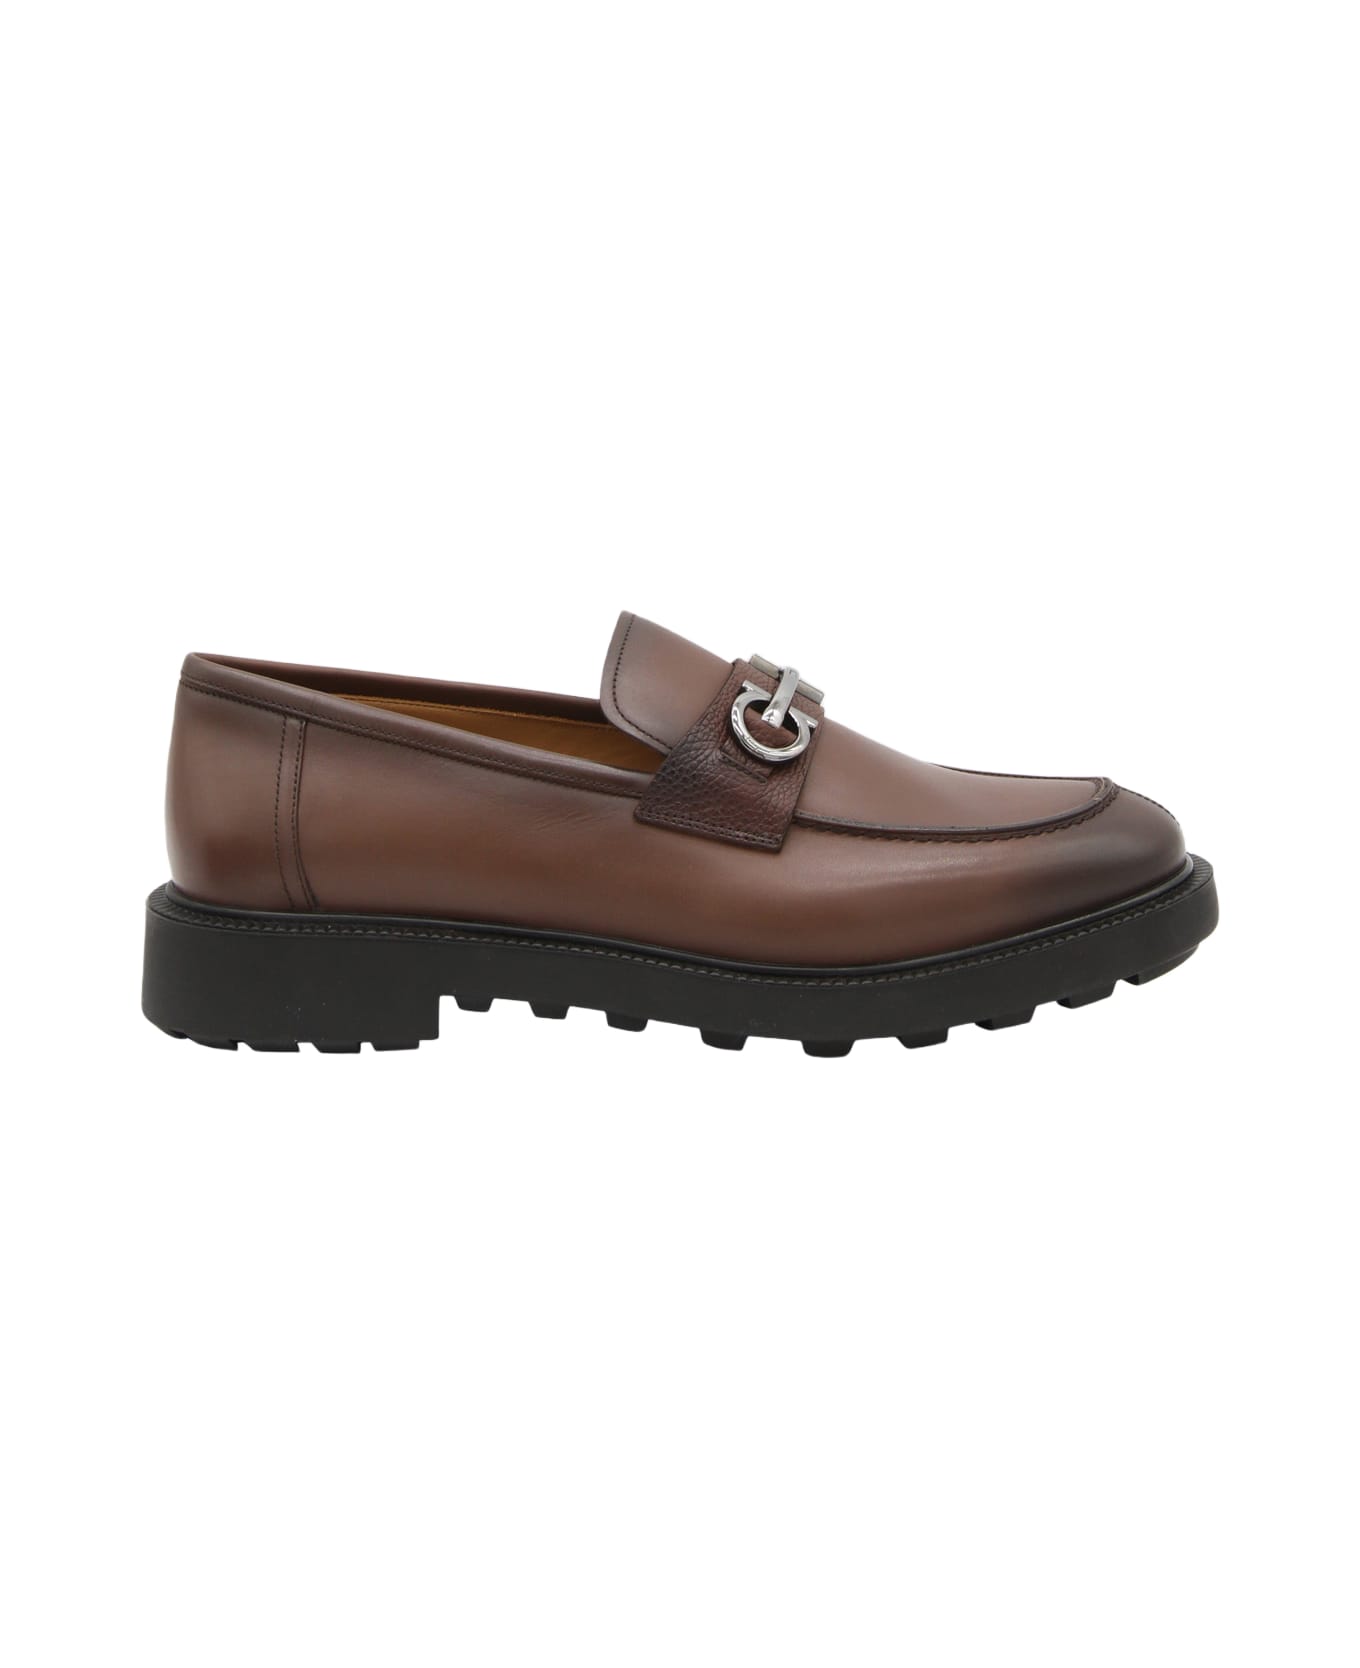 Ferragamo Brown Leather Loafers - Brown